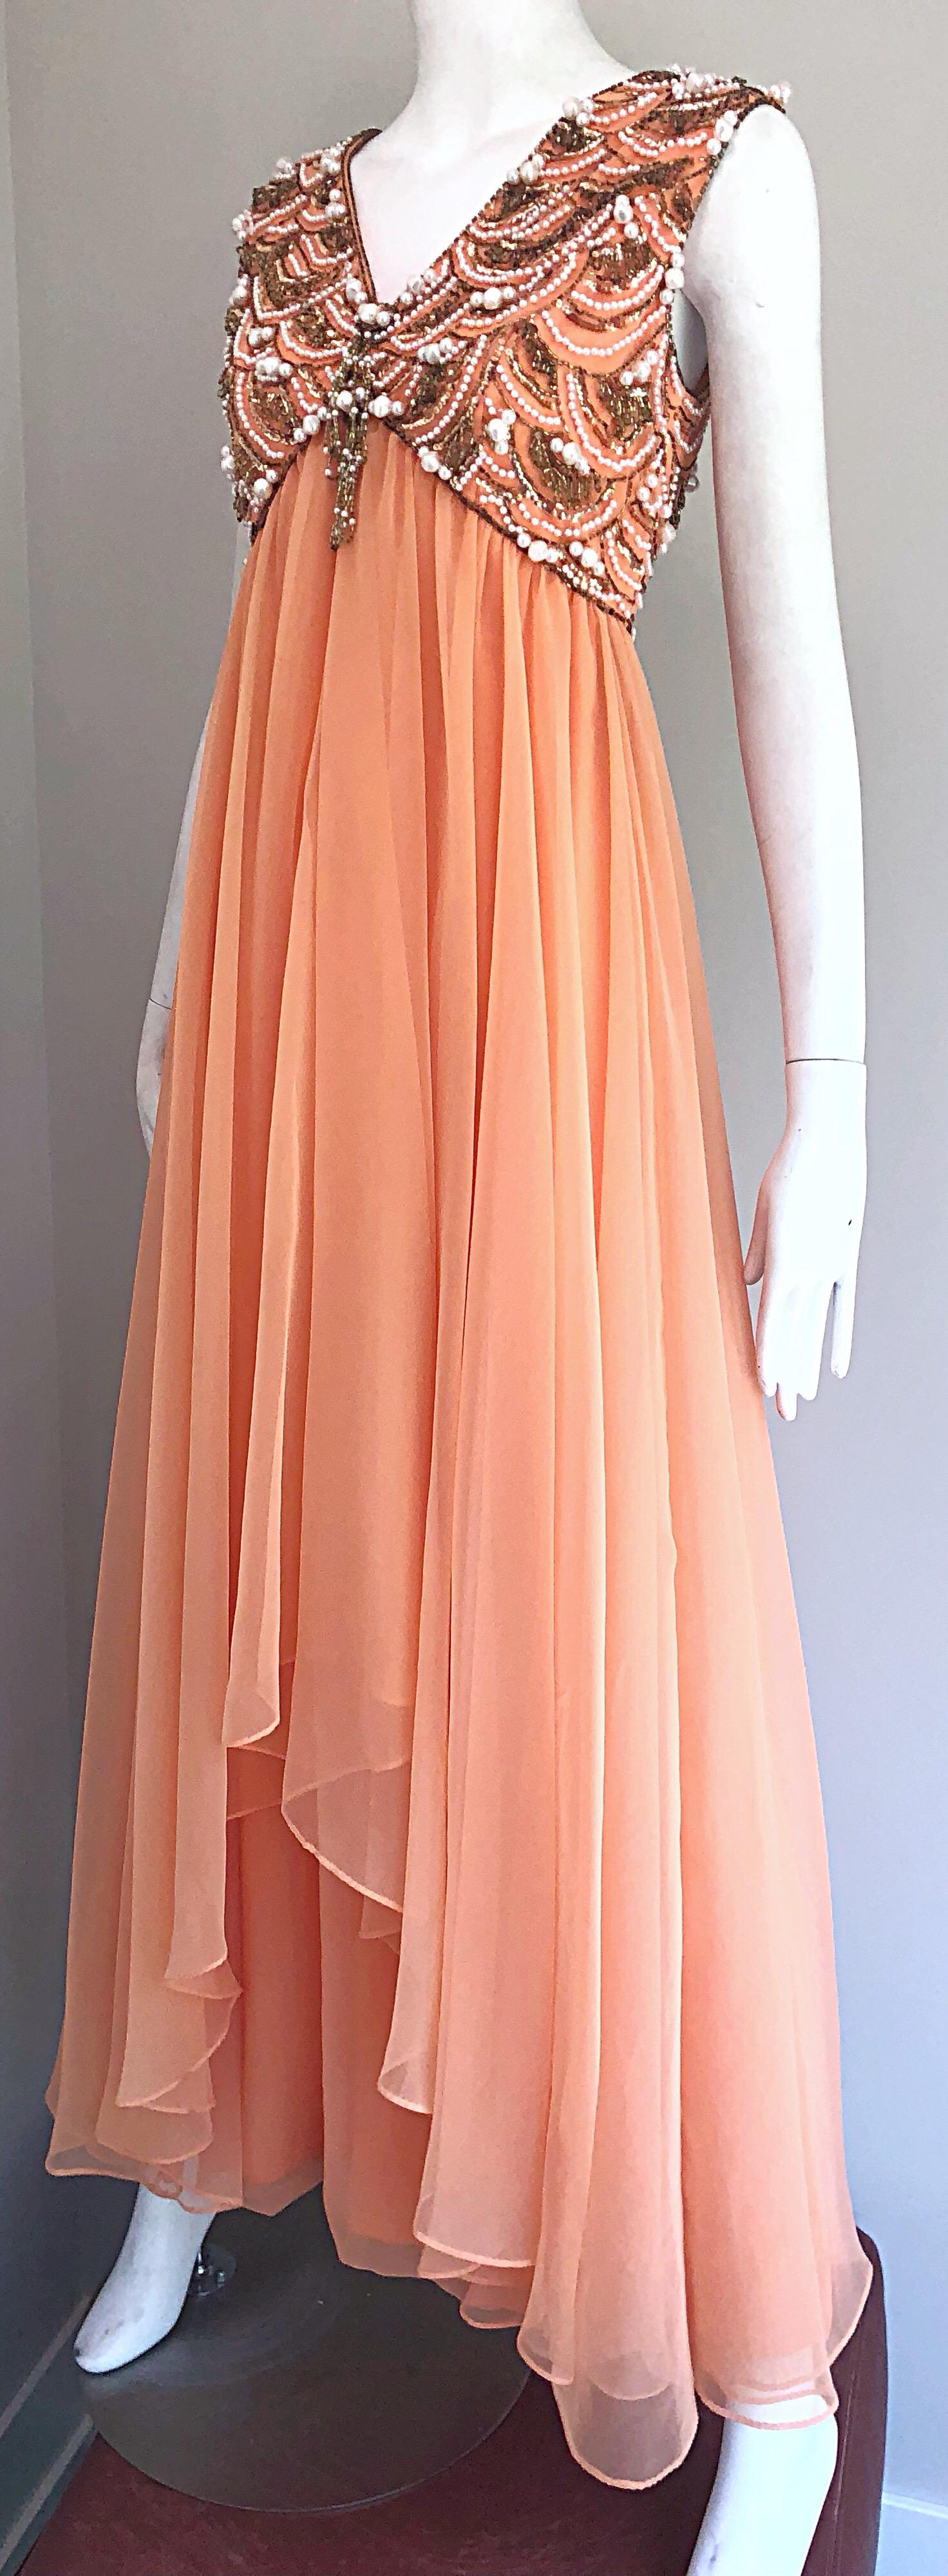 1960s Isabell Gerhart Sherbet Coral Demi Couture Beaded Chiffon 60s Gown Dress For Sale 5